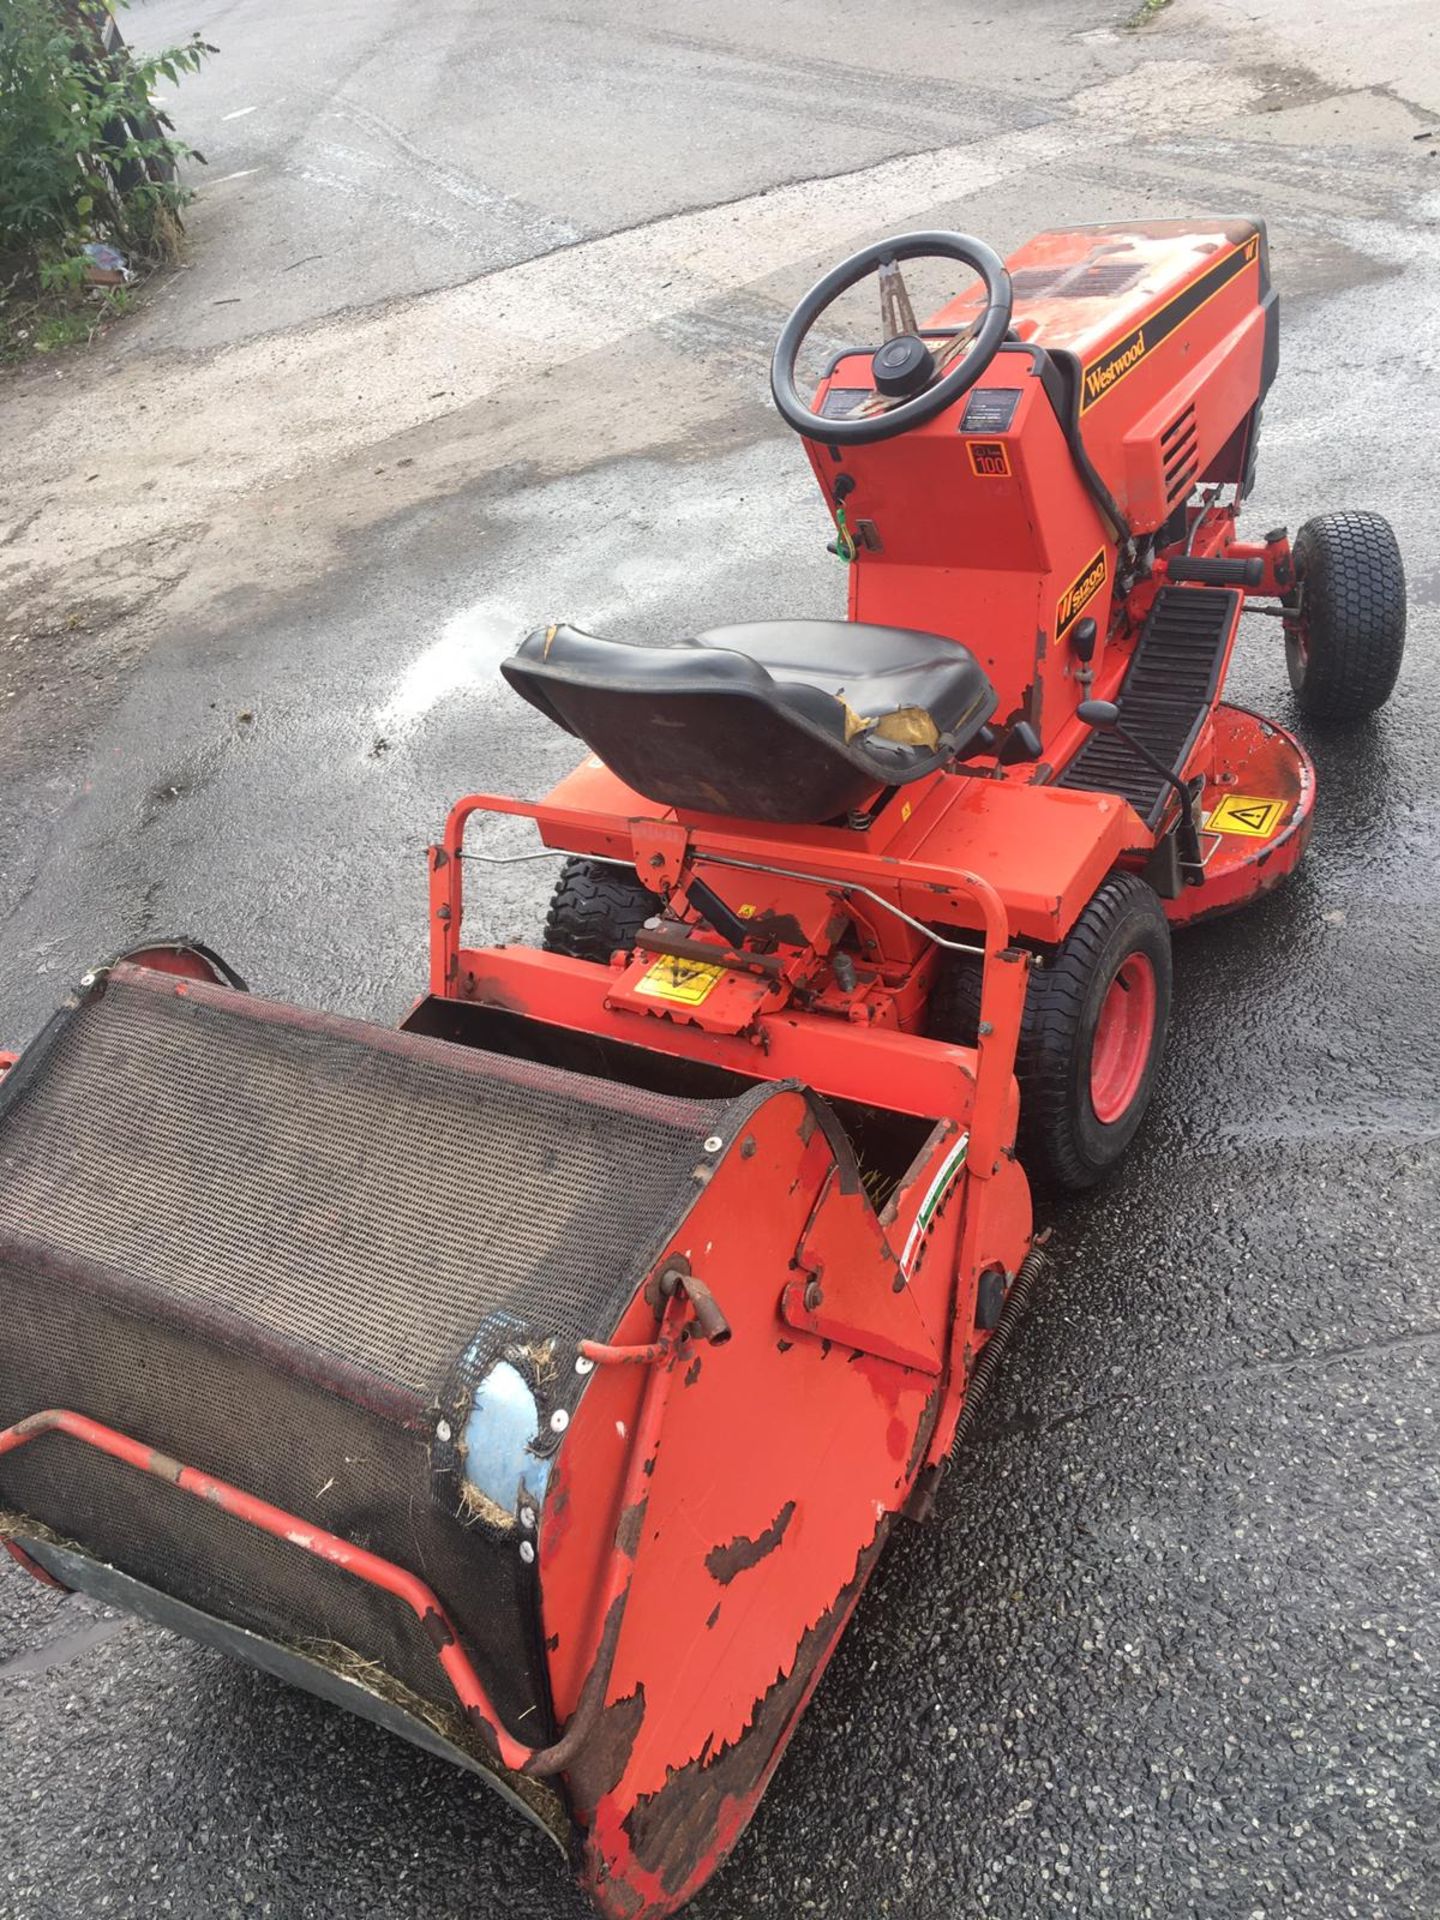 RANSOMES WESTWOOD WSI200 12.5 HP ELECTRIC START, 36" CUTTING DECK, RUNS, WORKS AND CUTS *NO VAT* - Image 4 of 12